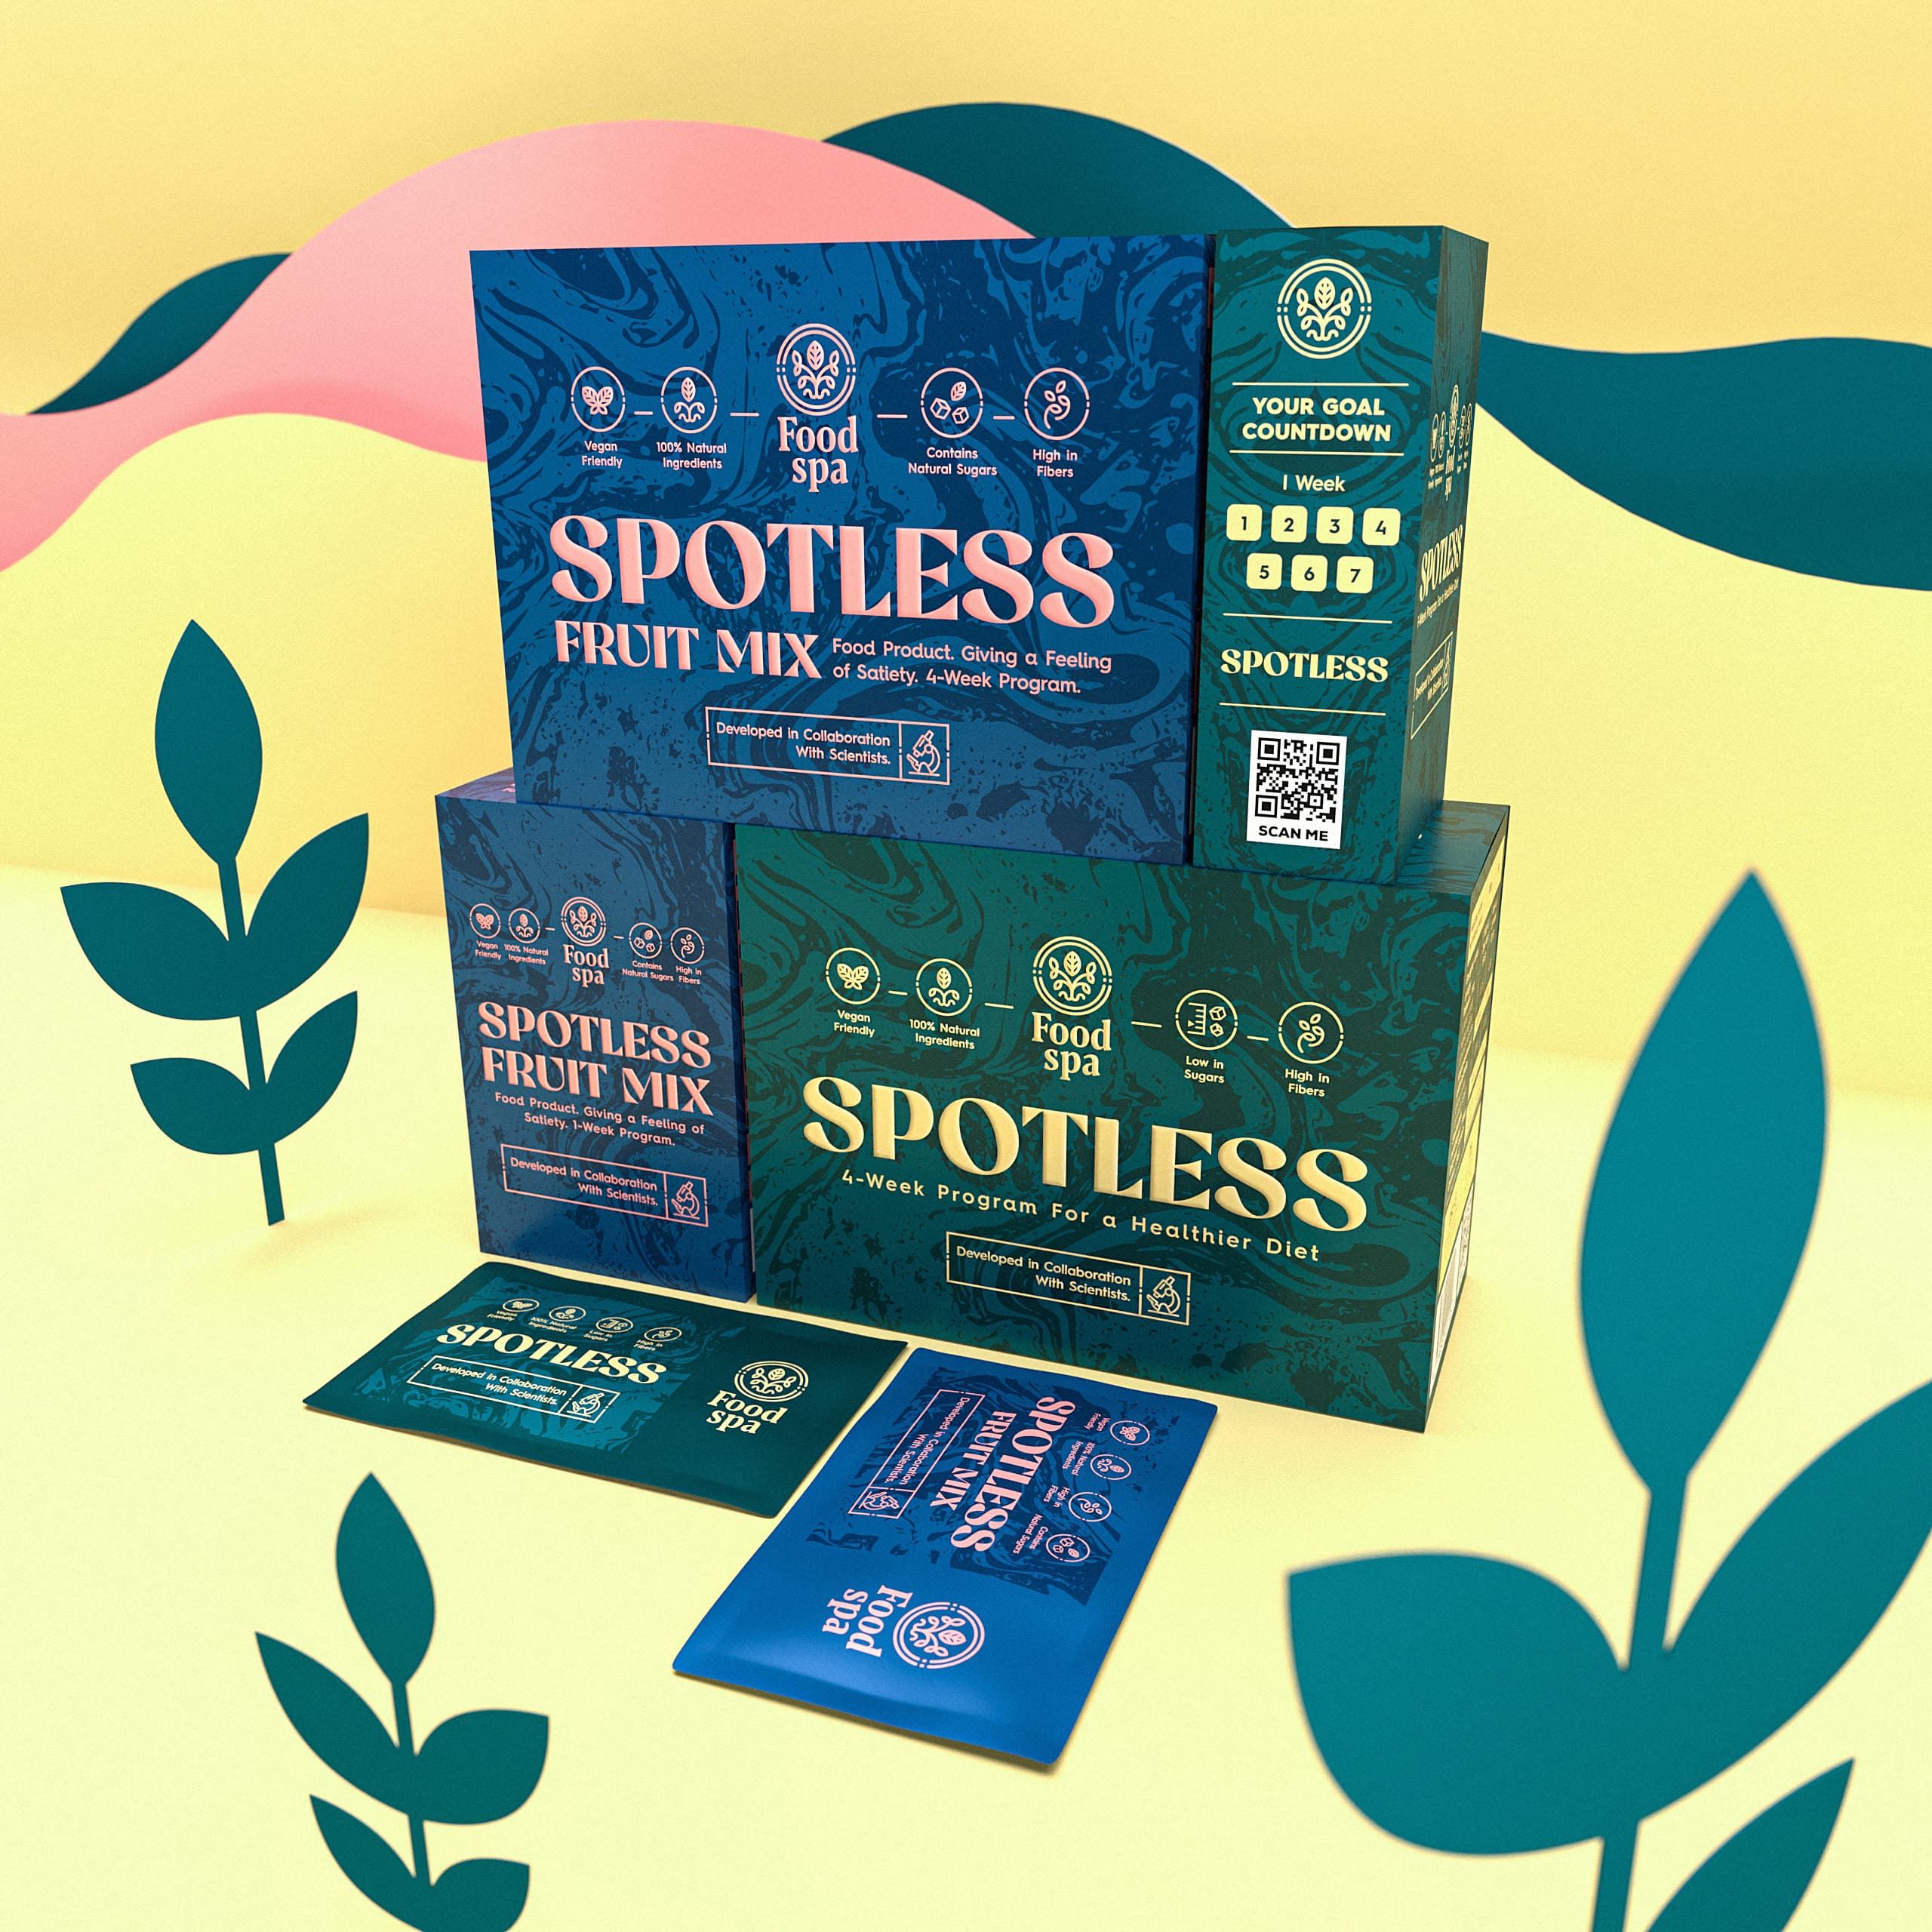 Spotless Food Spa Branding And Packaging Design